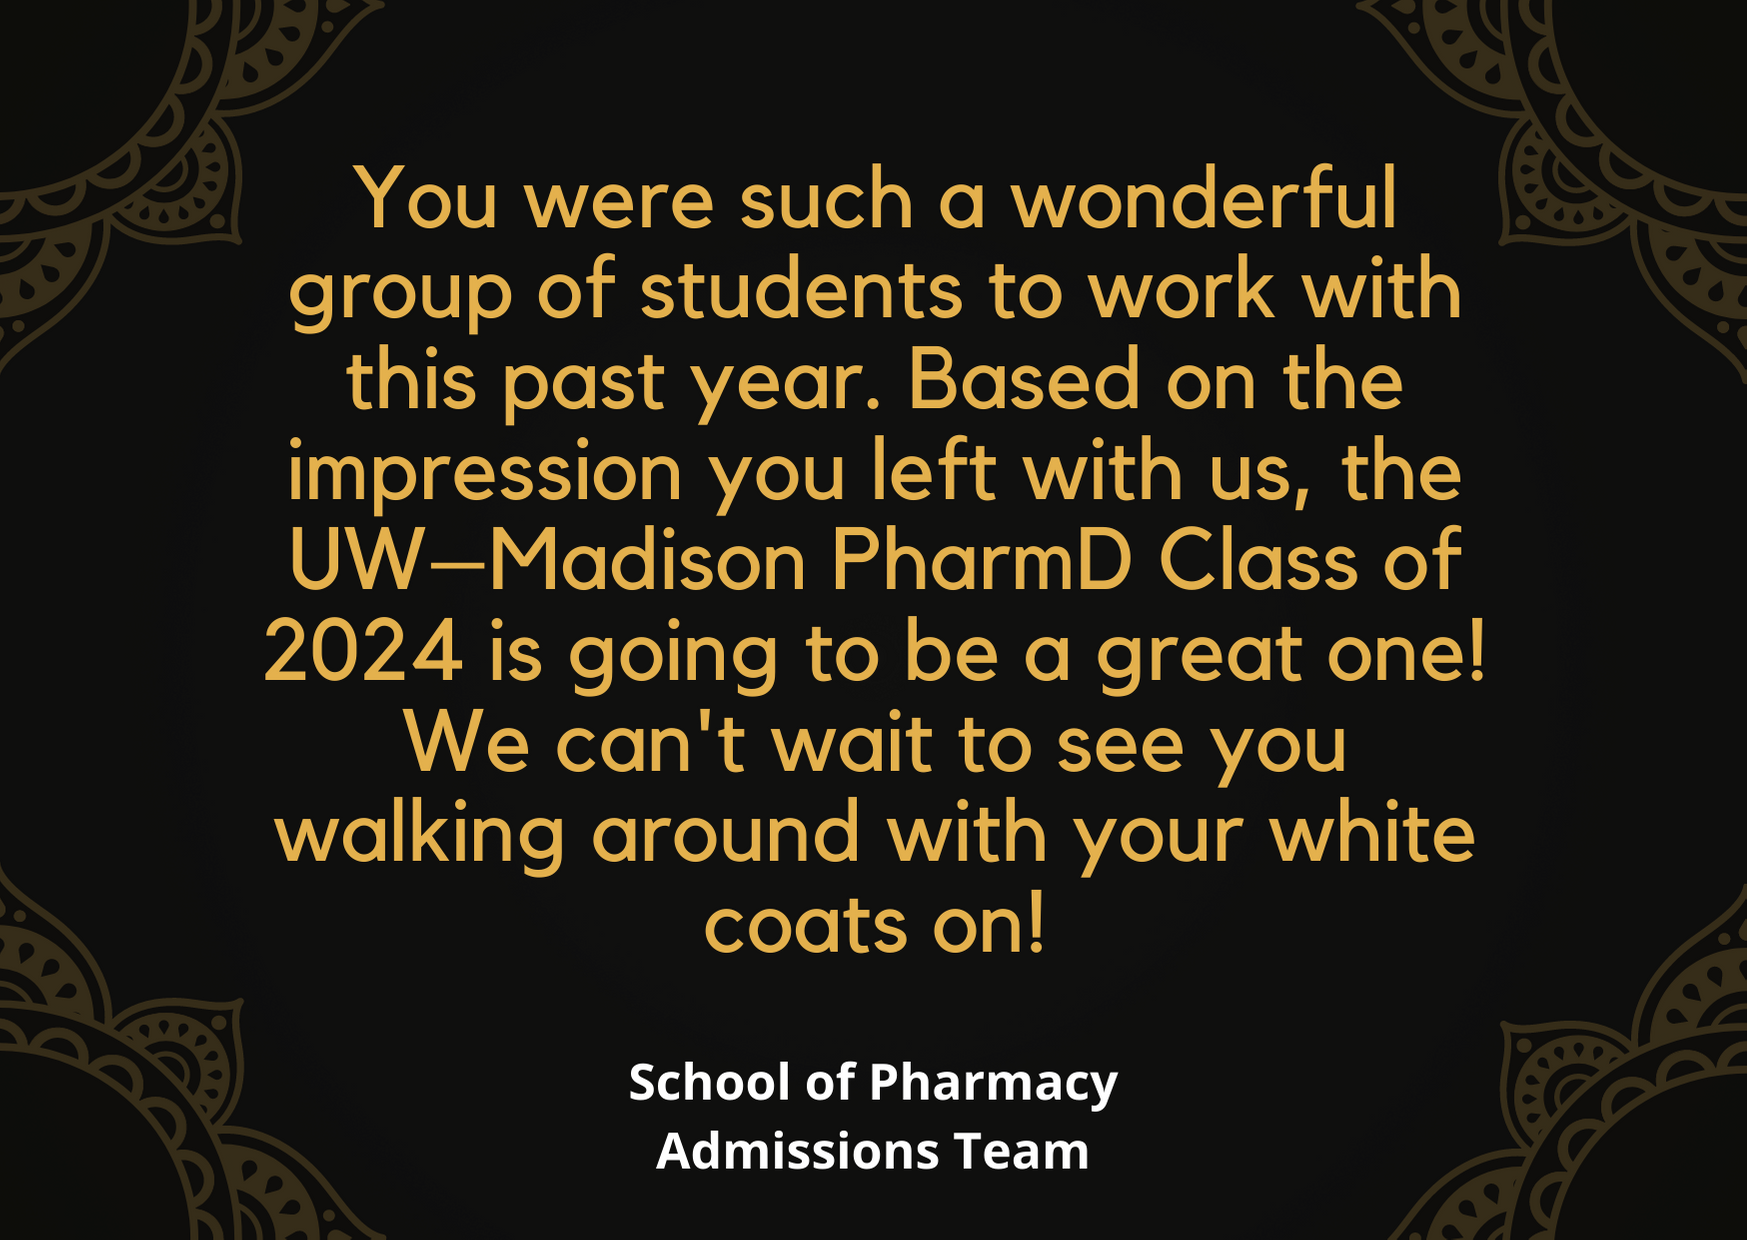 School of pharmacy note during the white coat ceremony to the Class of 2024